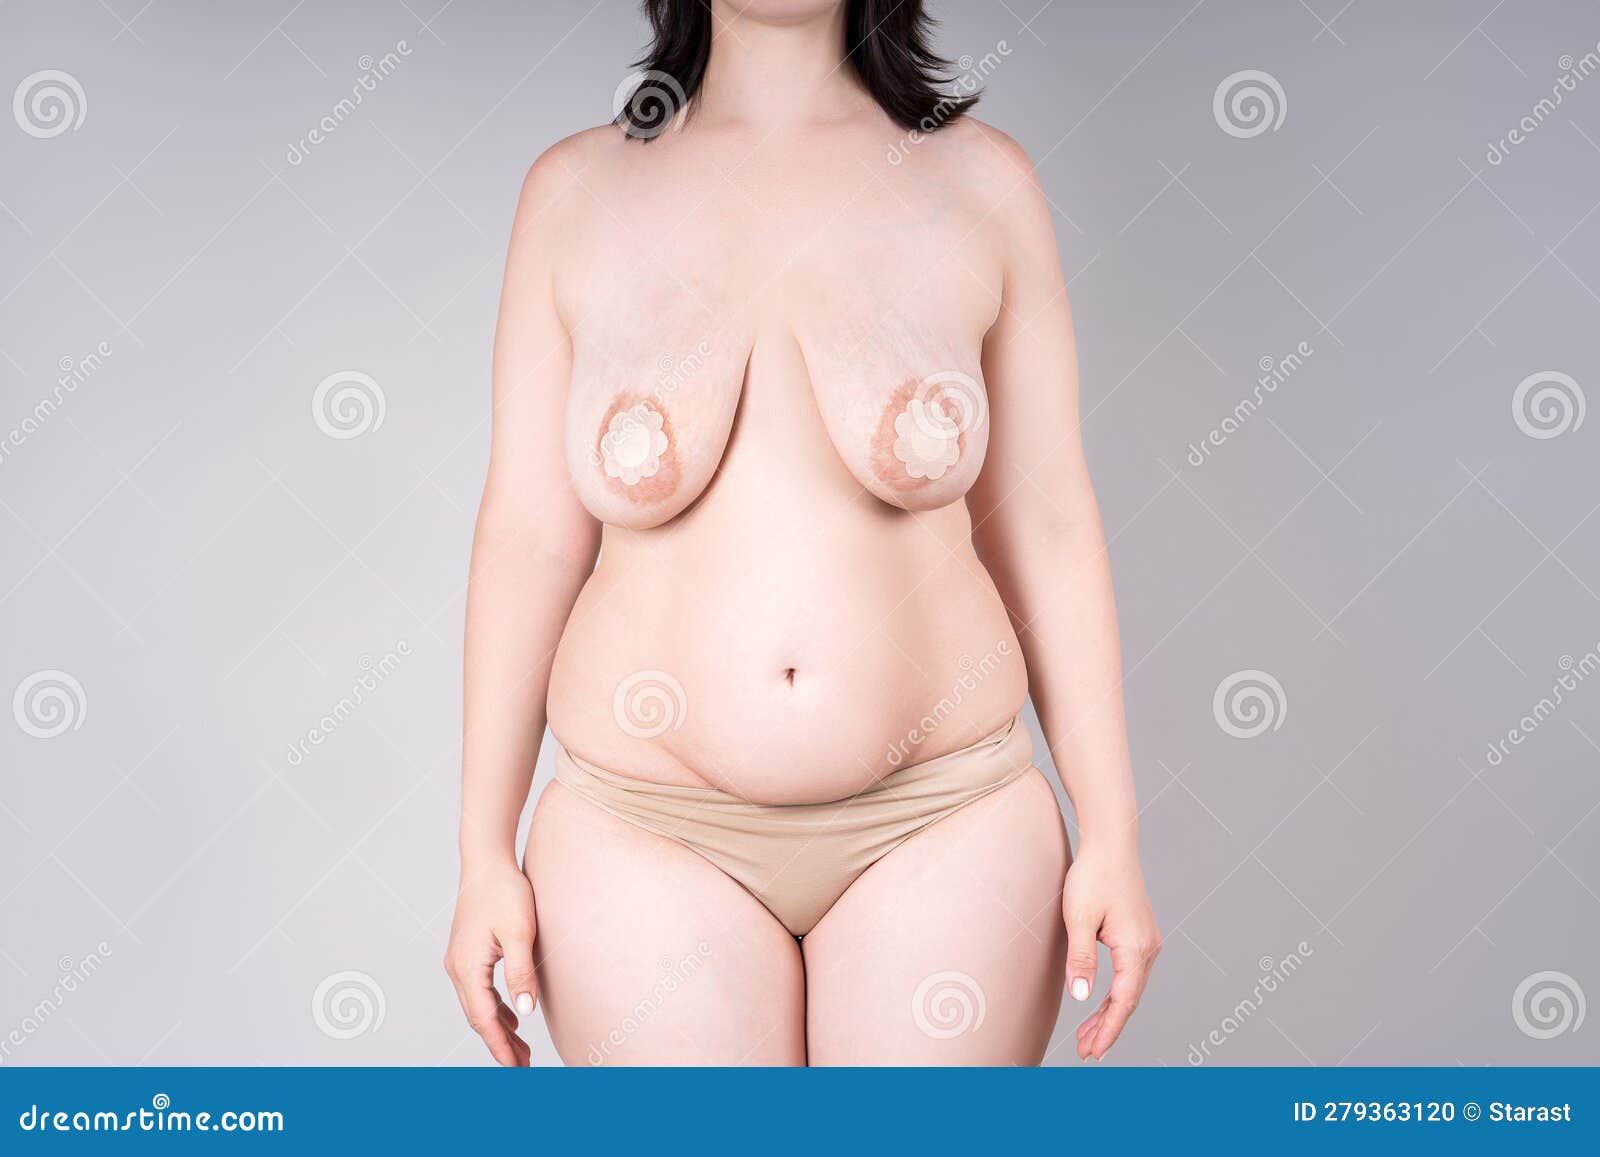 Fat Woman with Saggy Breasts, Obese Female Body, Plastic Surgery